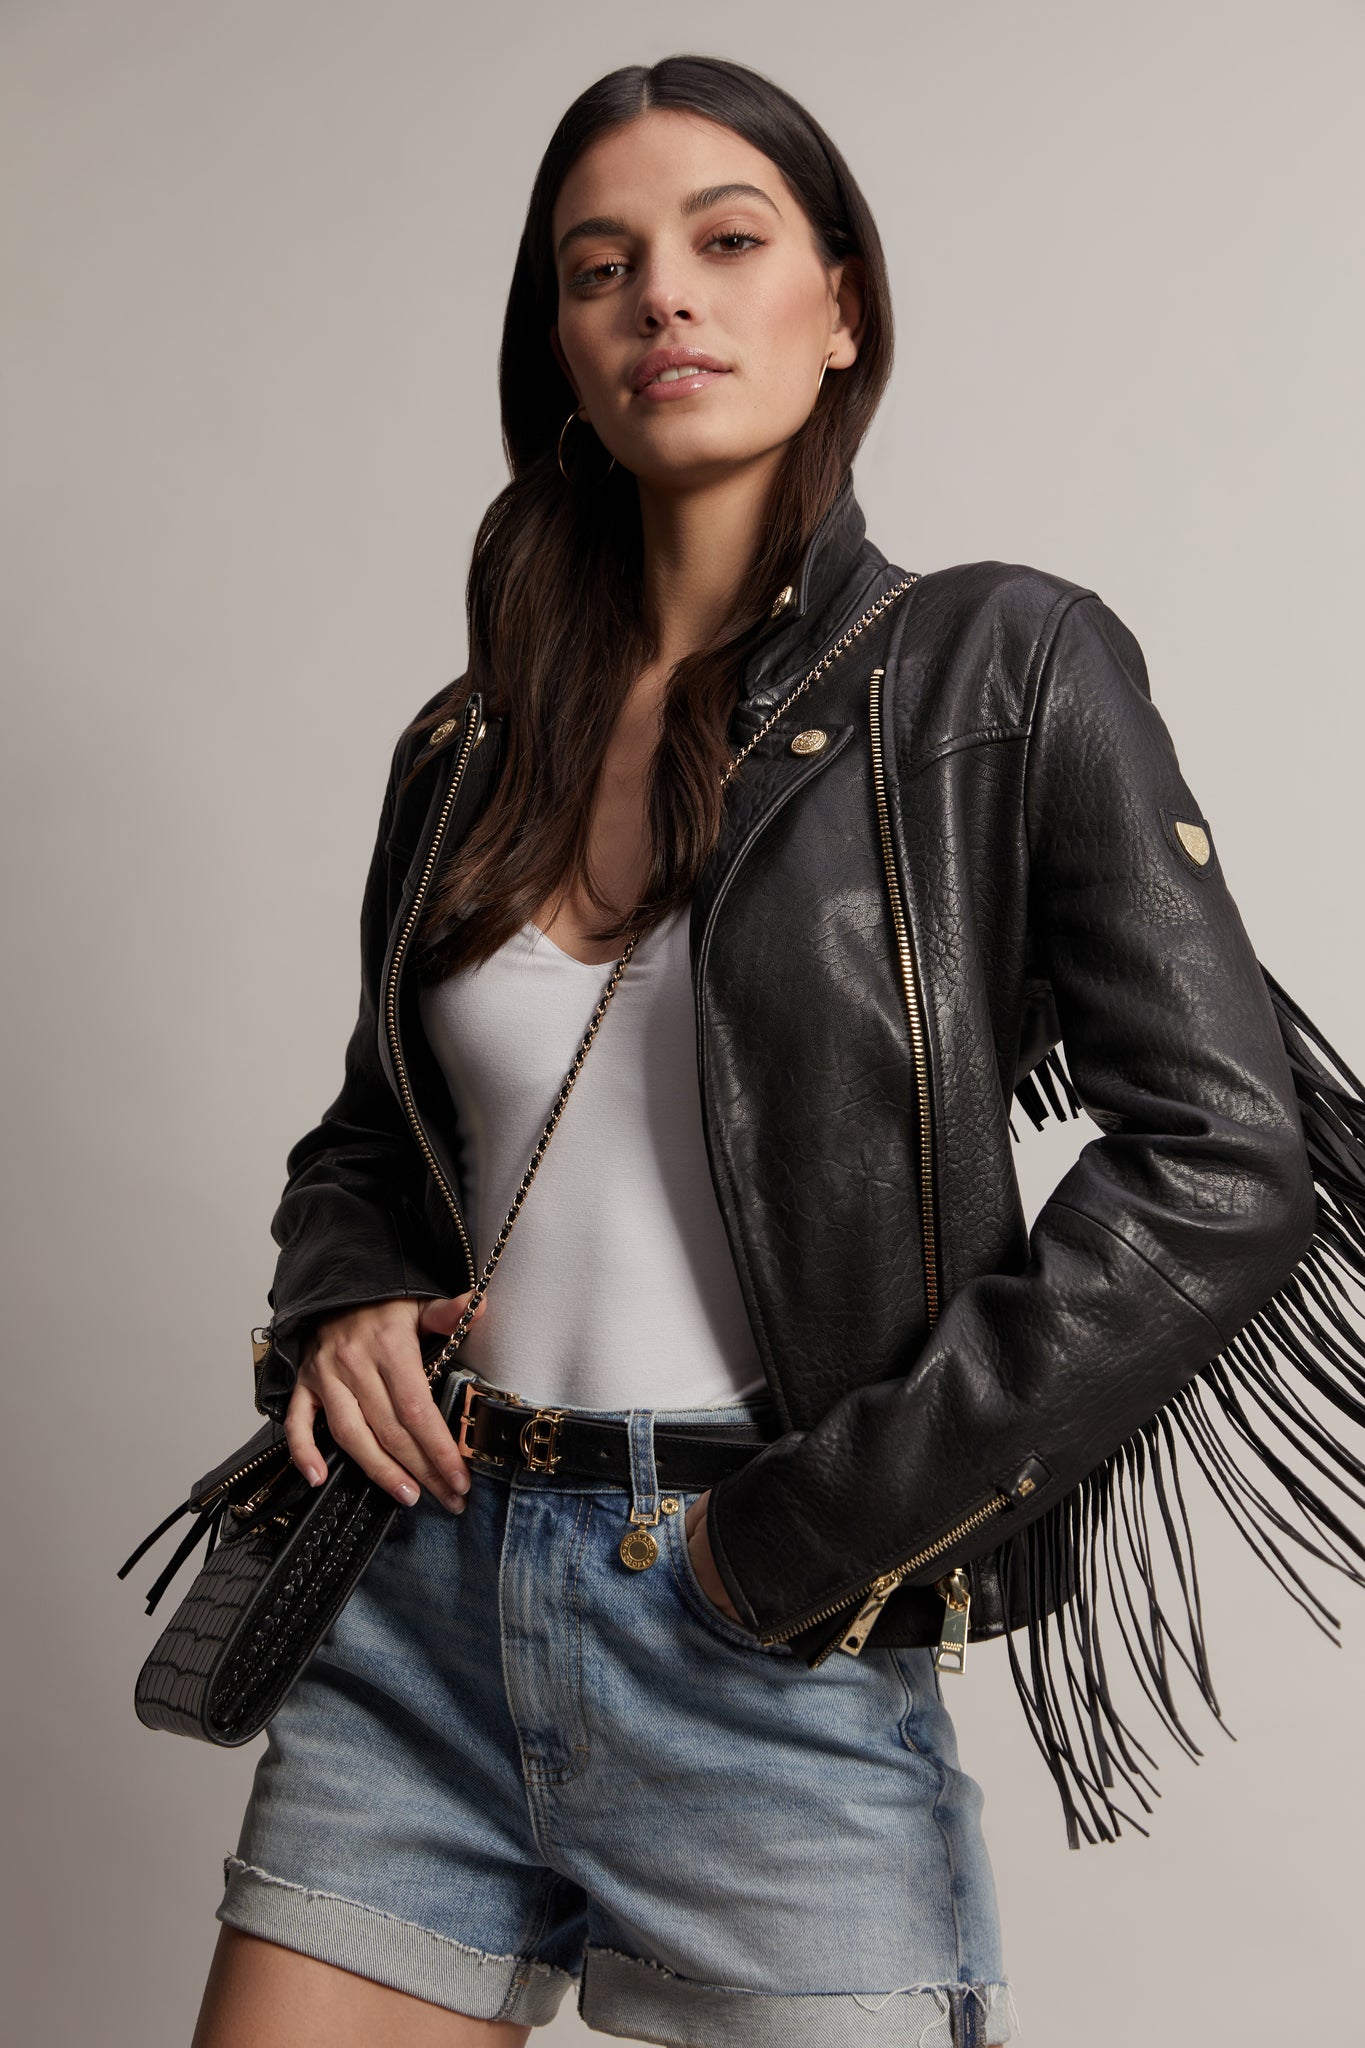 womens leather biker jacket in black with fringing along the back and sleeves detailed with golf zips and small shield badge on arm